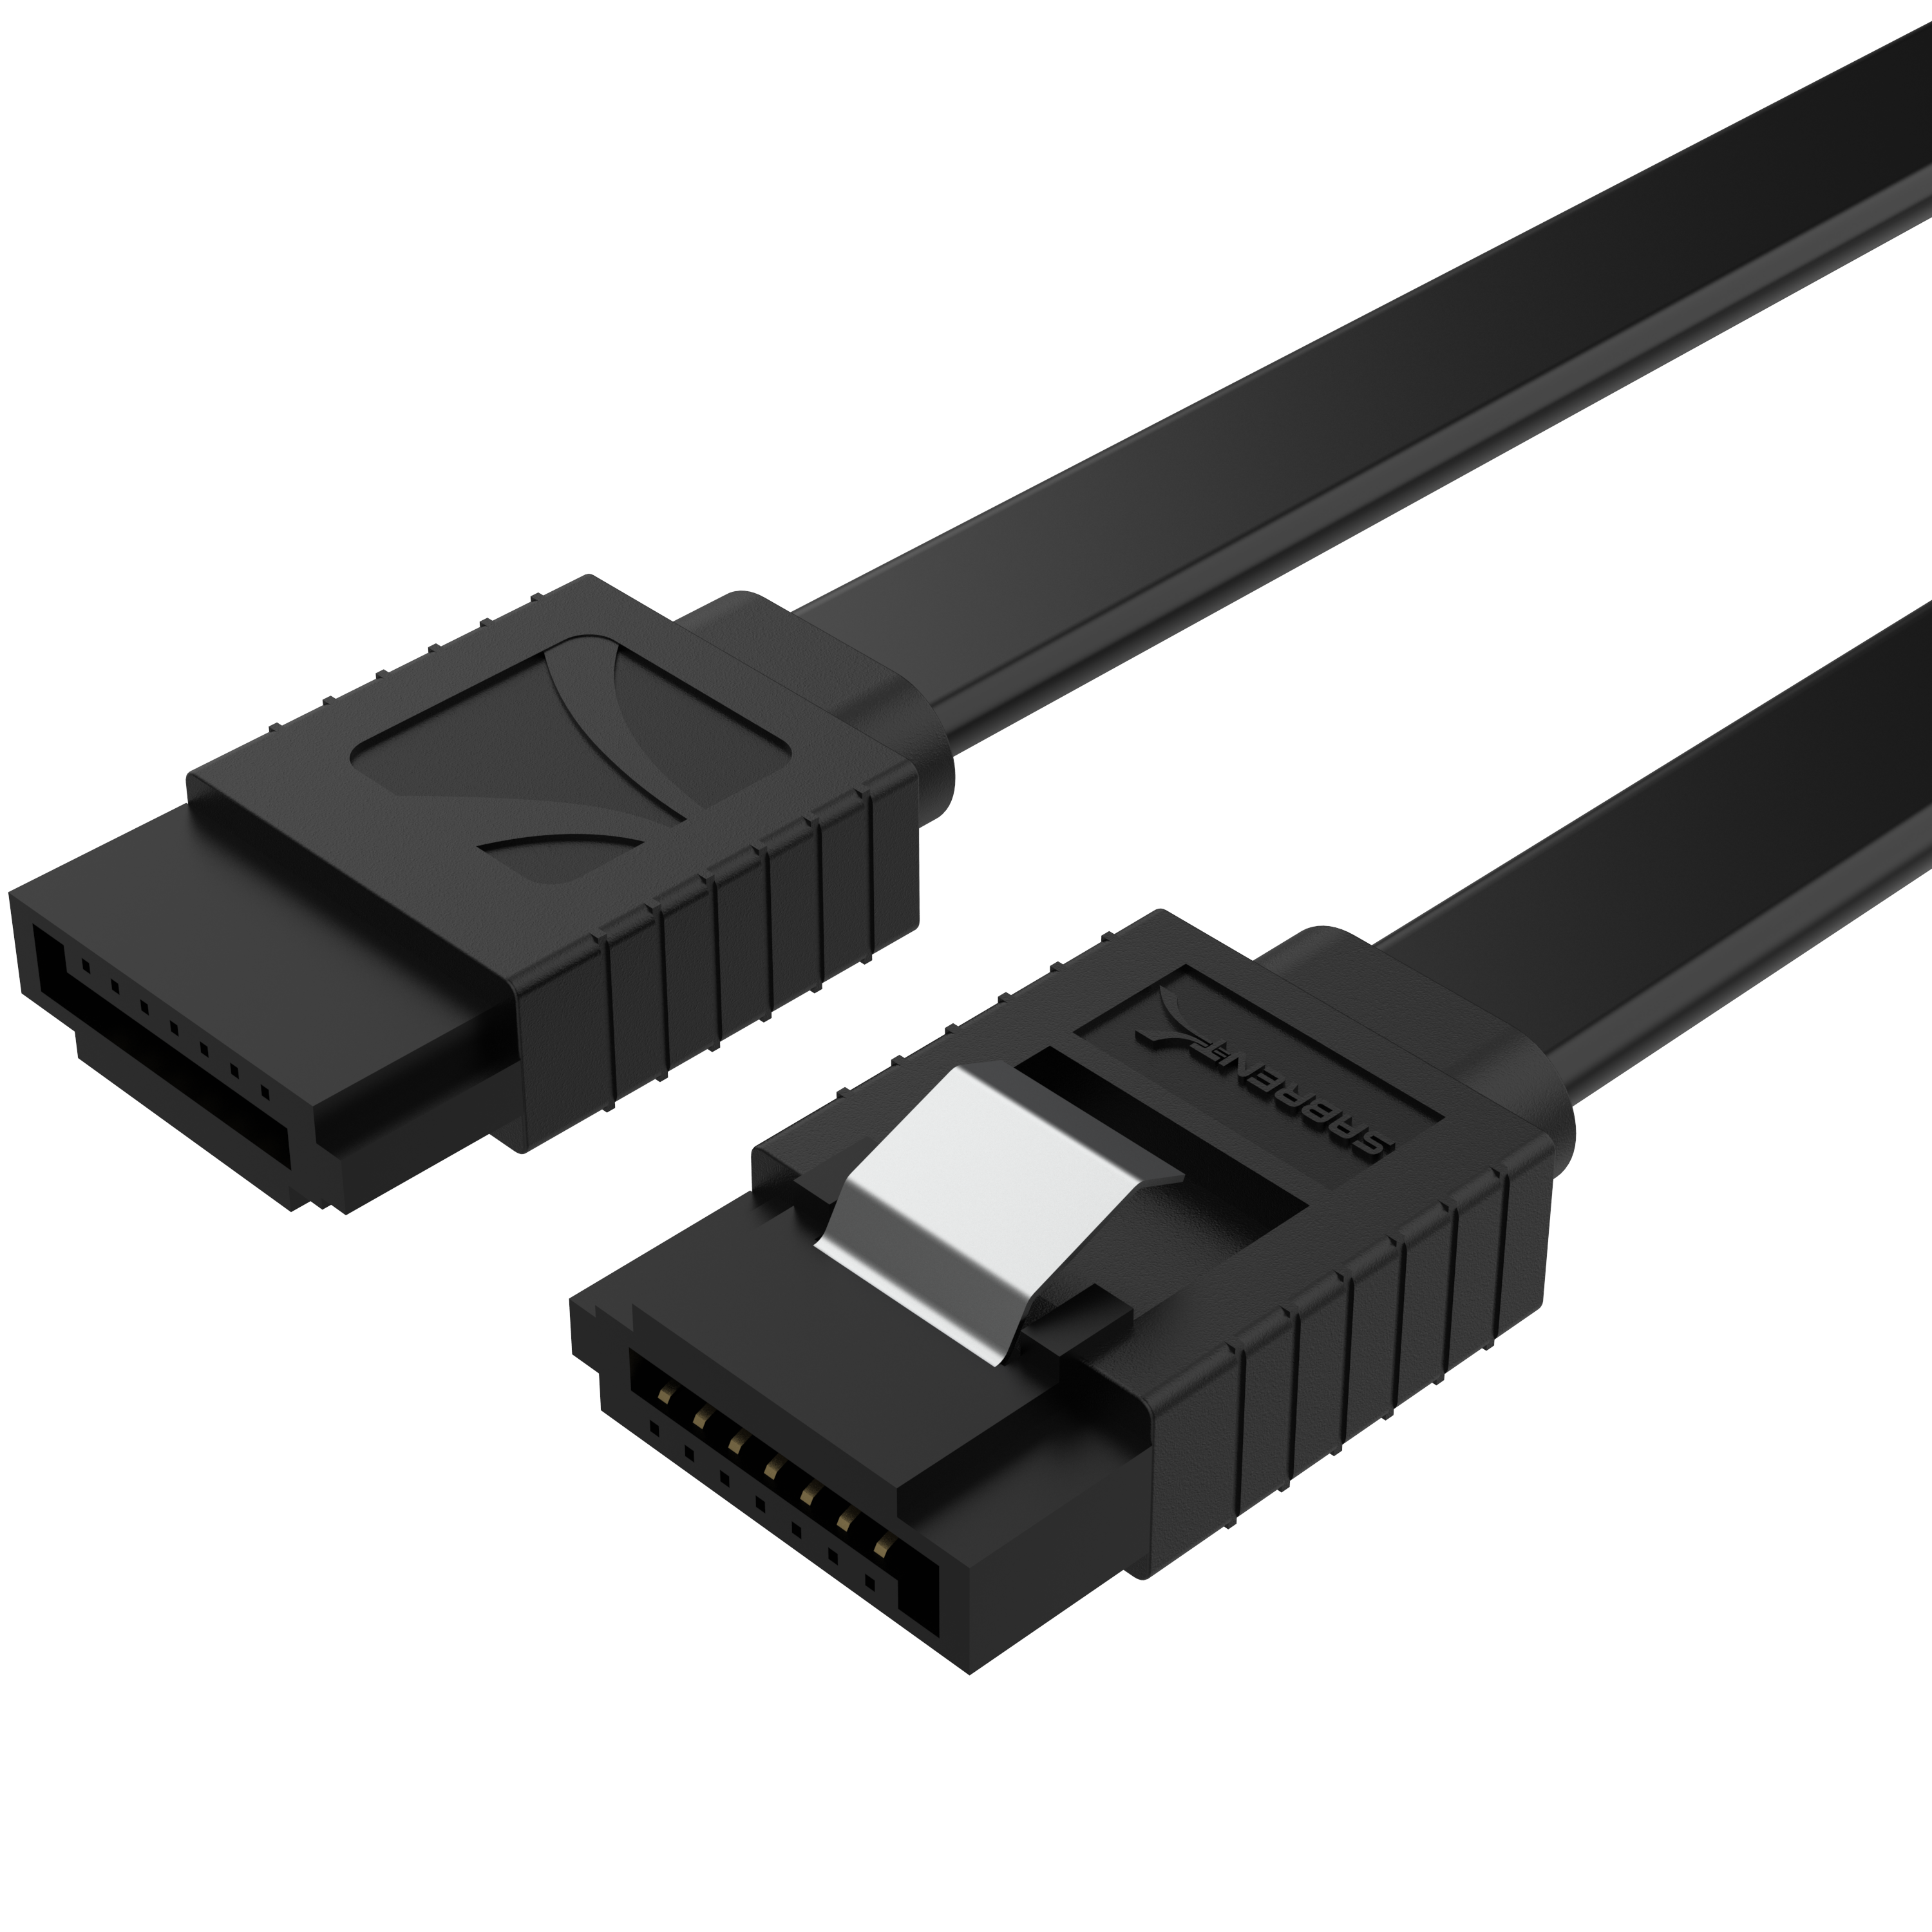 Sabrent SATA III (6 Gbit/s) Straight Data Cable with Locking Latch for HDD / SSD / CD and DVD Drives (3 Pack - 20-Inch) in Black (CB-SFK3)